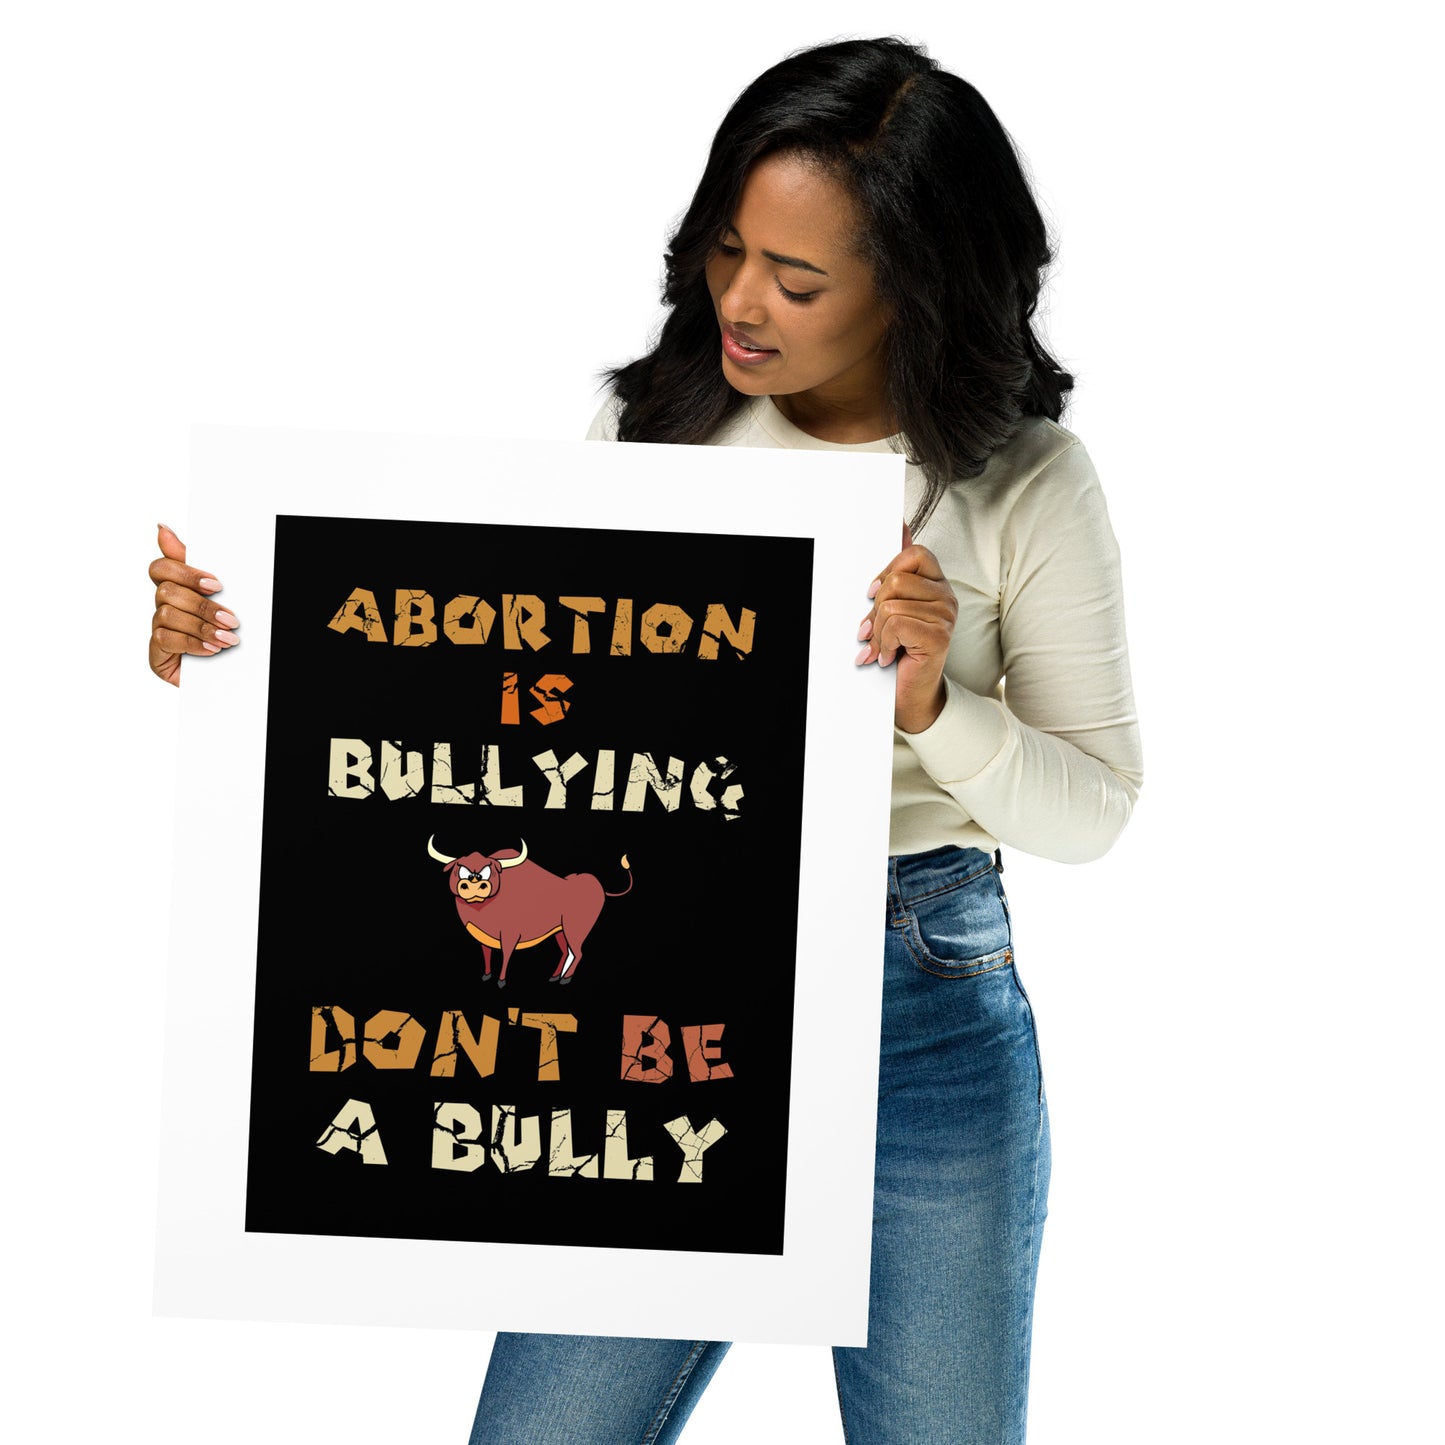 A001 Art Print - Museum Quality Giclée Print Featuring Bull-Steer Graphic with text “Abortion is Bullying. Don’t be a Bully.”